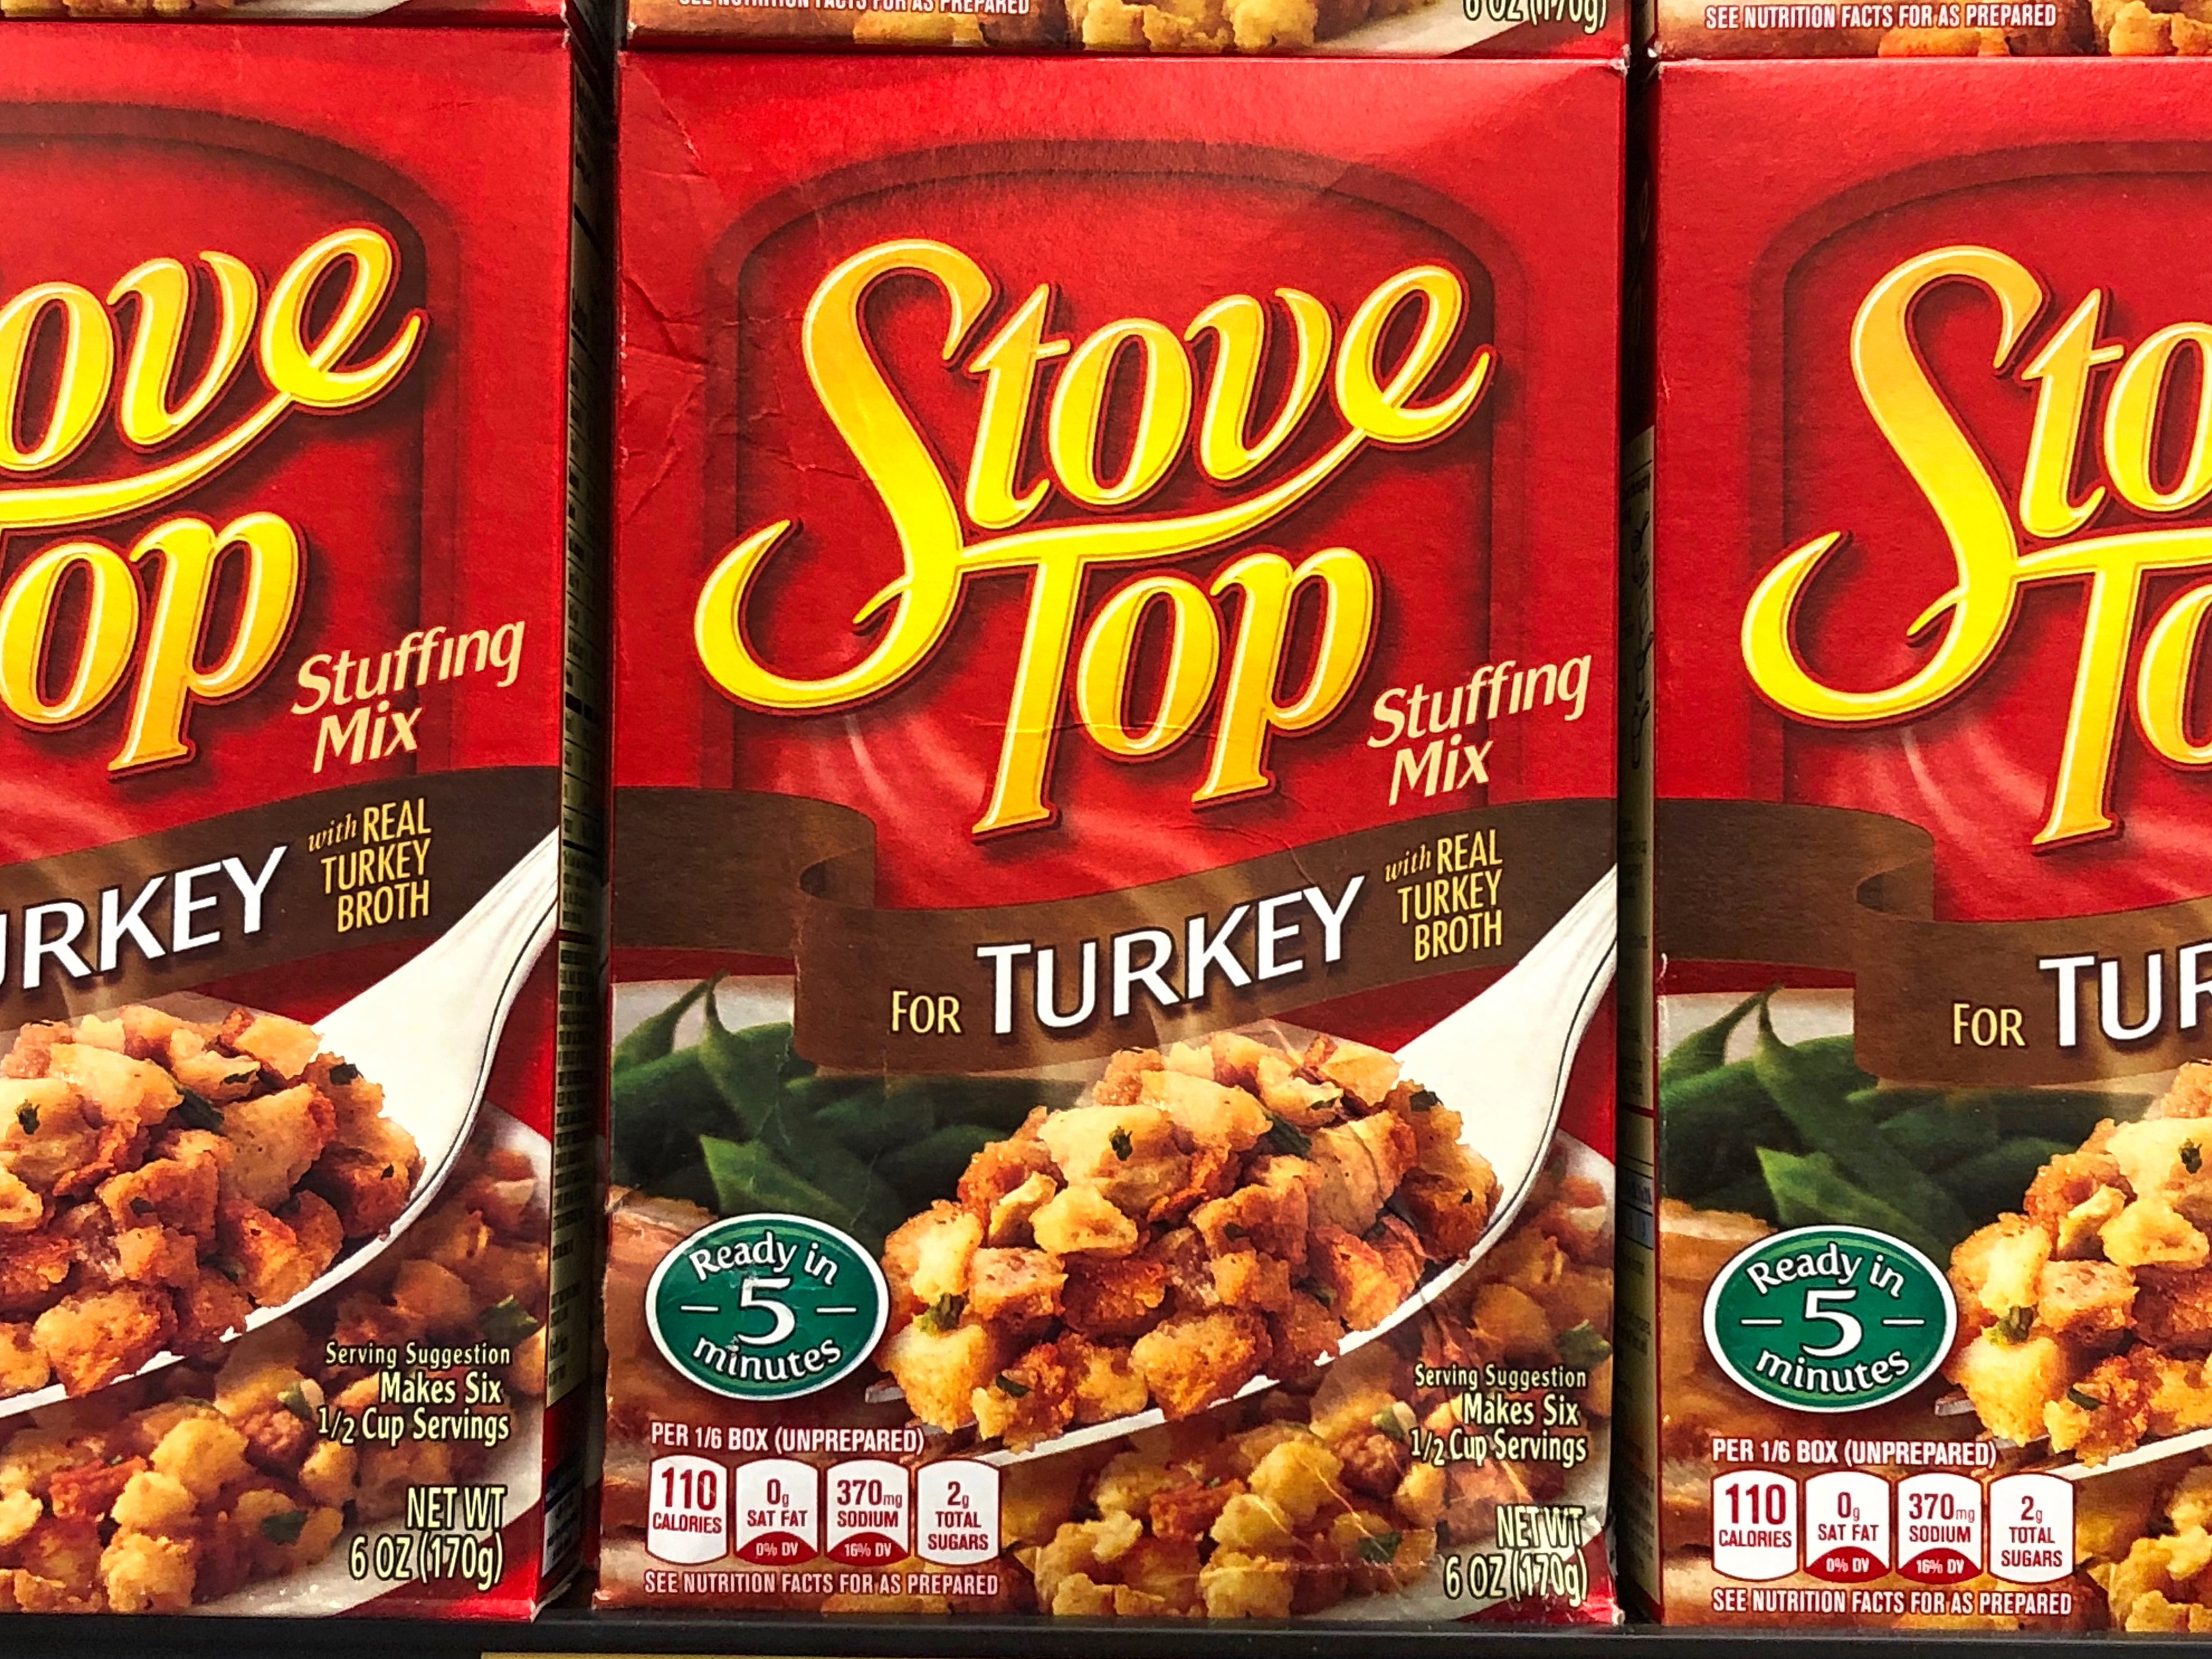 A closeup on three boxes of Stove Top stuffing